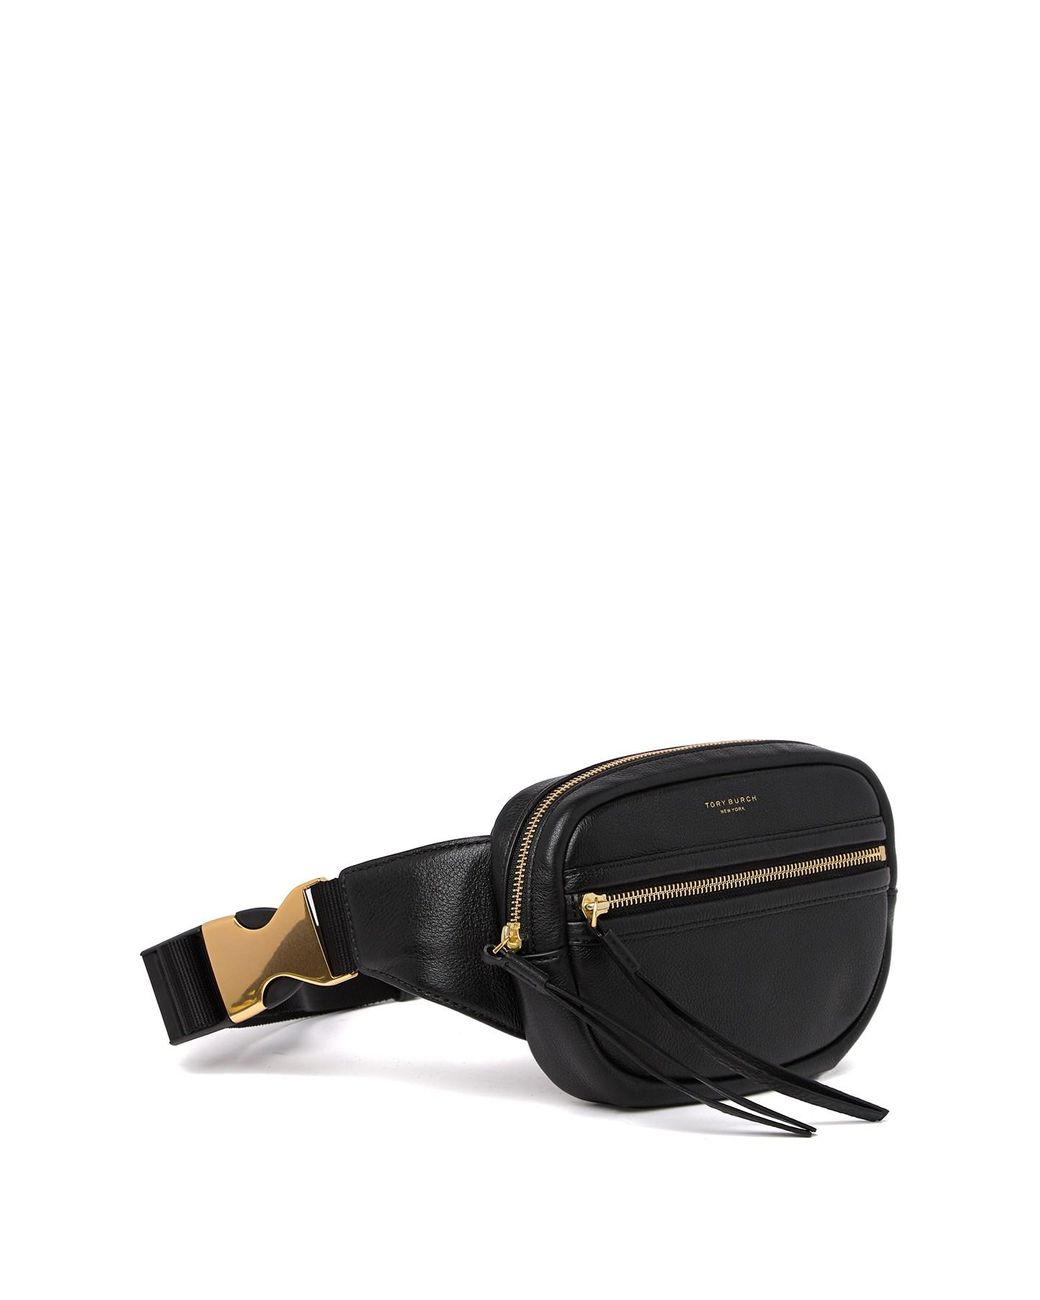 Tory Burch Perry Leather Belt Bag in Black | Lyst